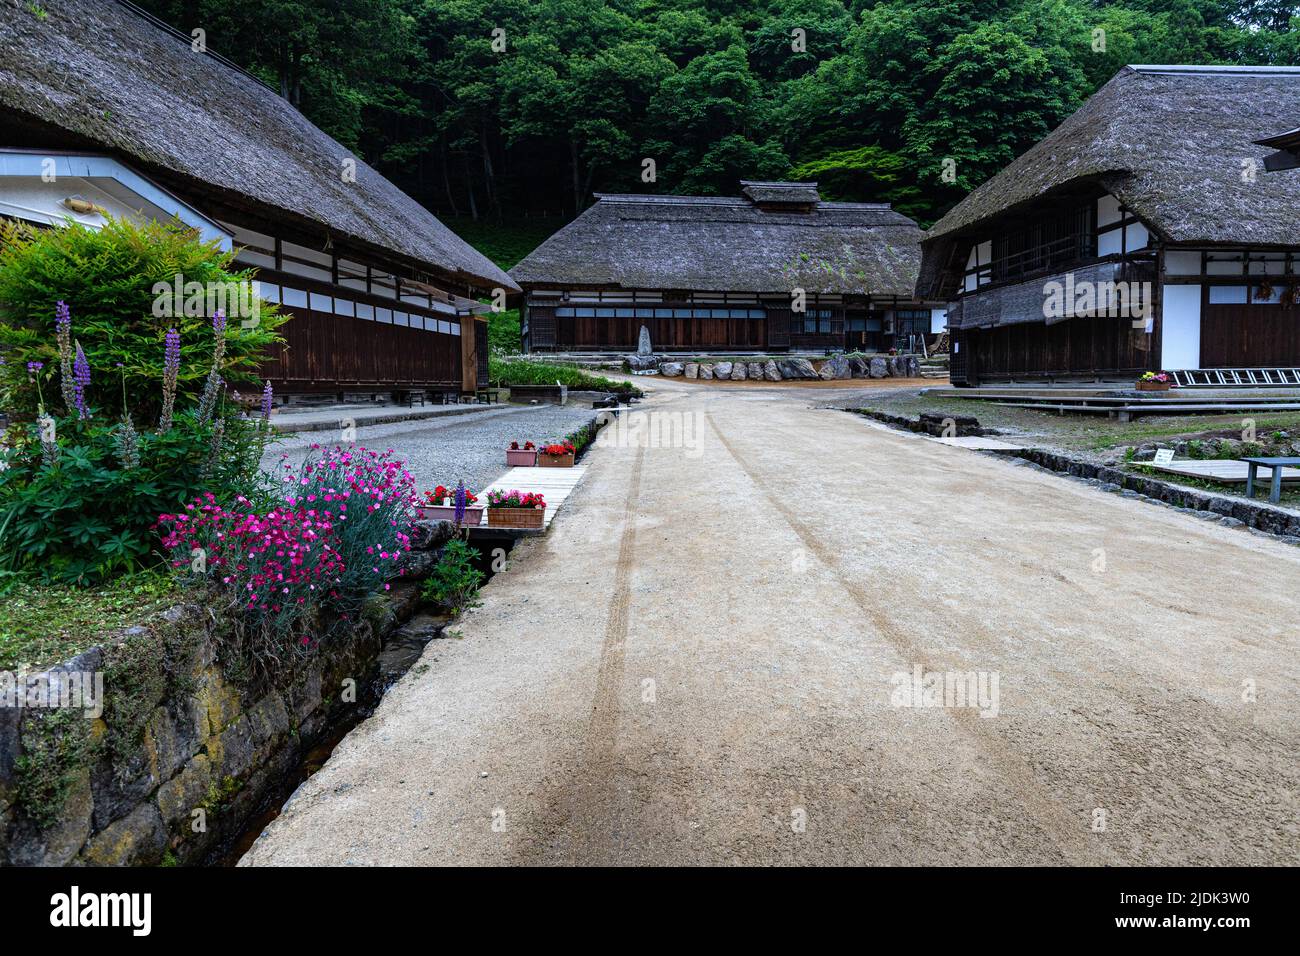 Ouchi-juku prospered as a post town on an important road connecting Aizu Wakamatsu City and Nikko during the Edo period. Even today, private homes wit Stock Photo